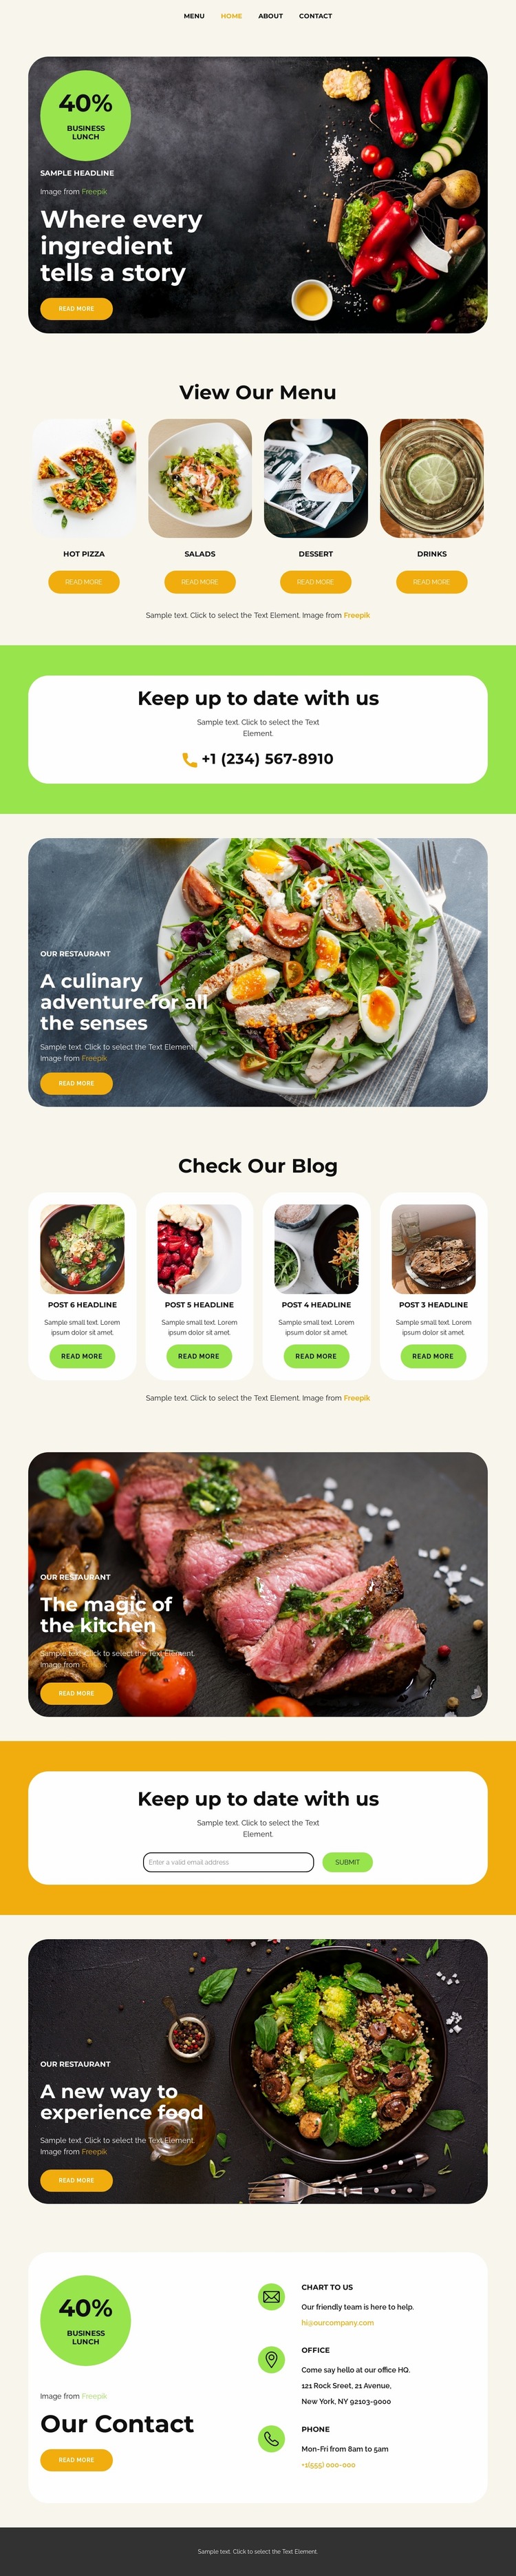 The magic of the kitchen Website Mockup